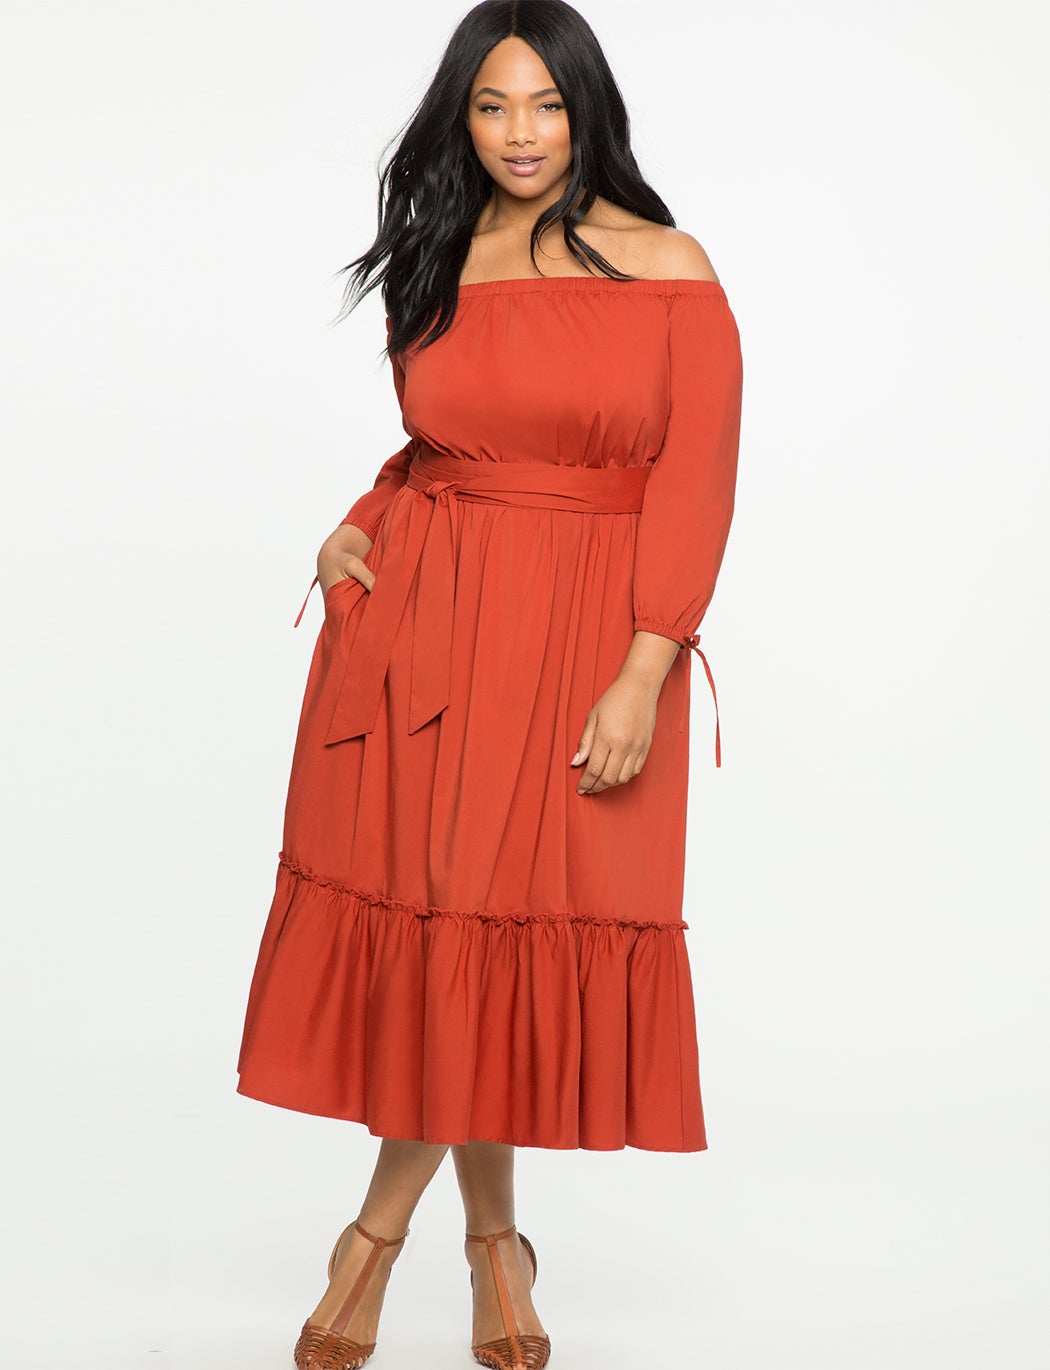 17 Pieces Every Curvy Girl Absolutely Needs From Eloquii's Clearance Sale
